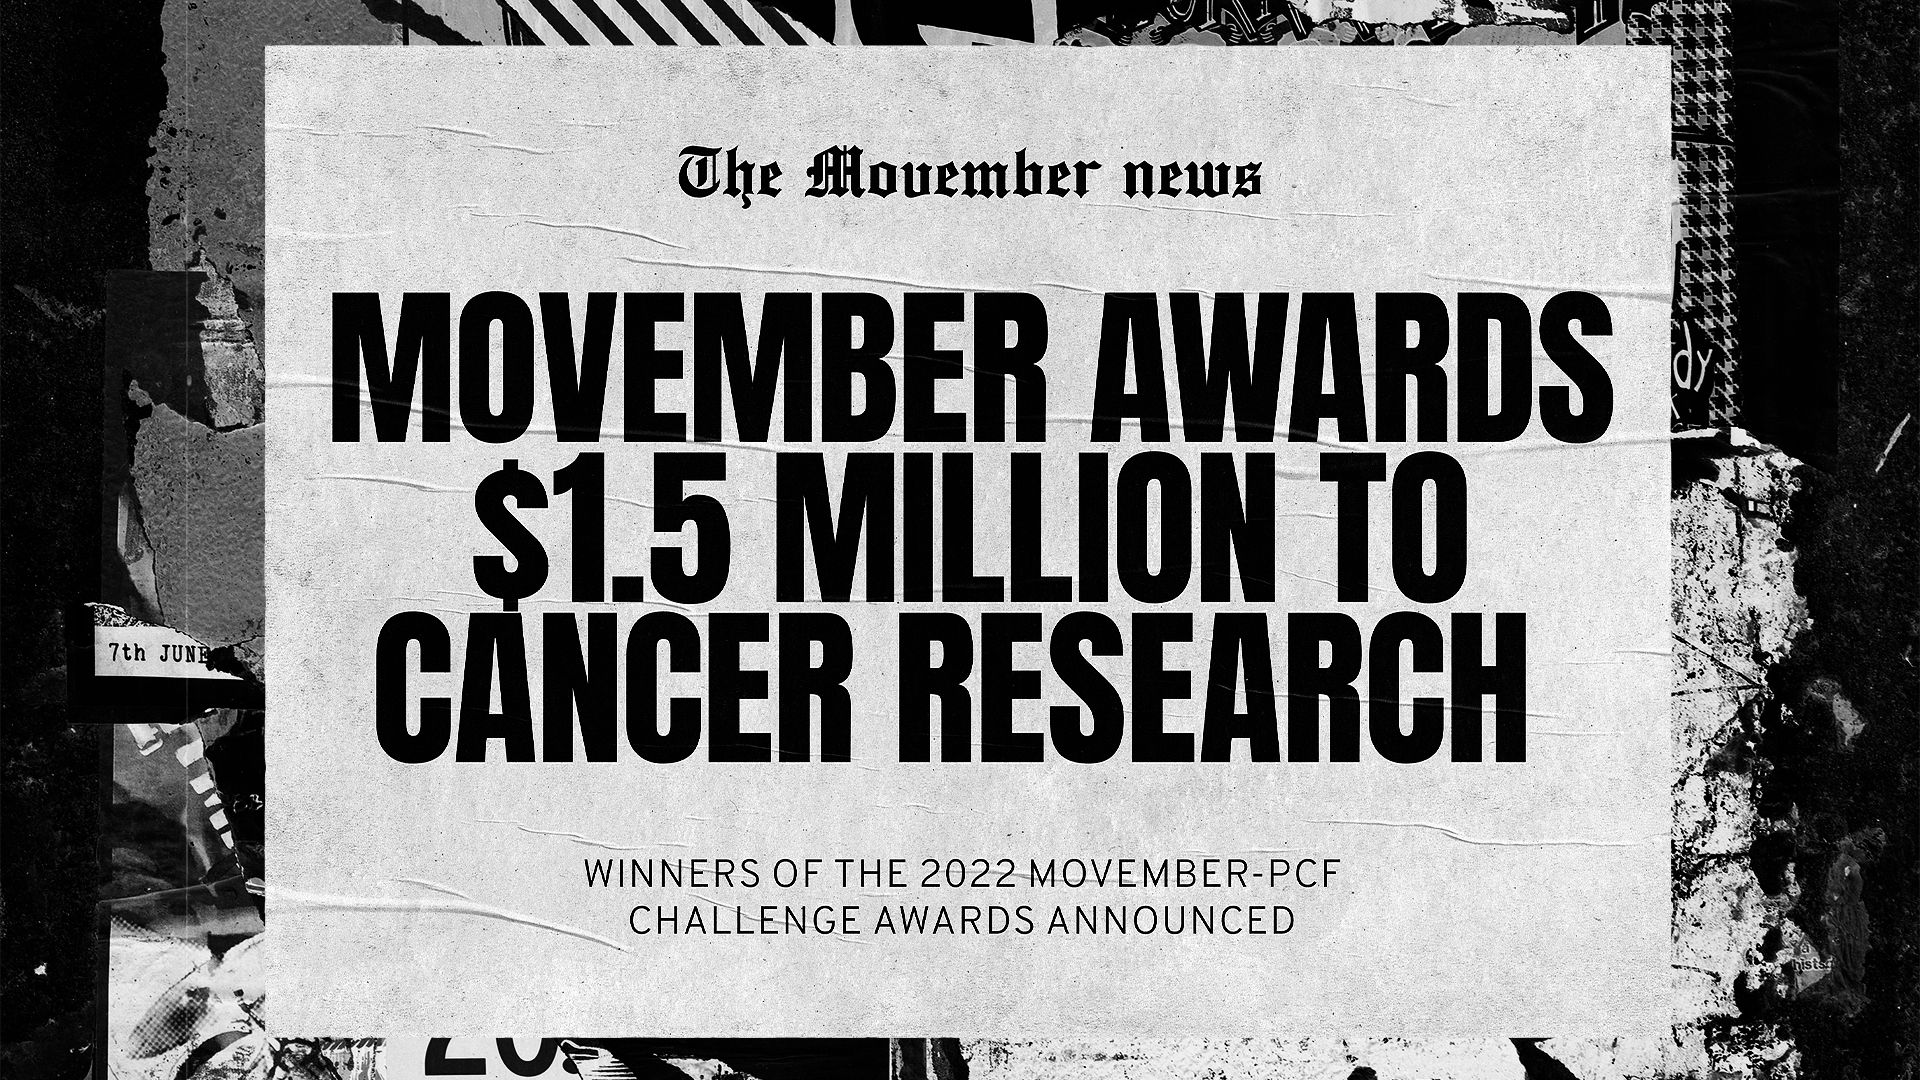 Newspaper layout "The Movember news: Movember awards $1.5 million to cancer research"